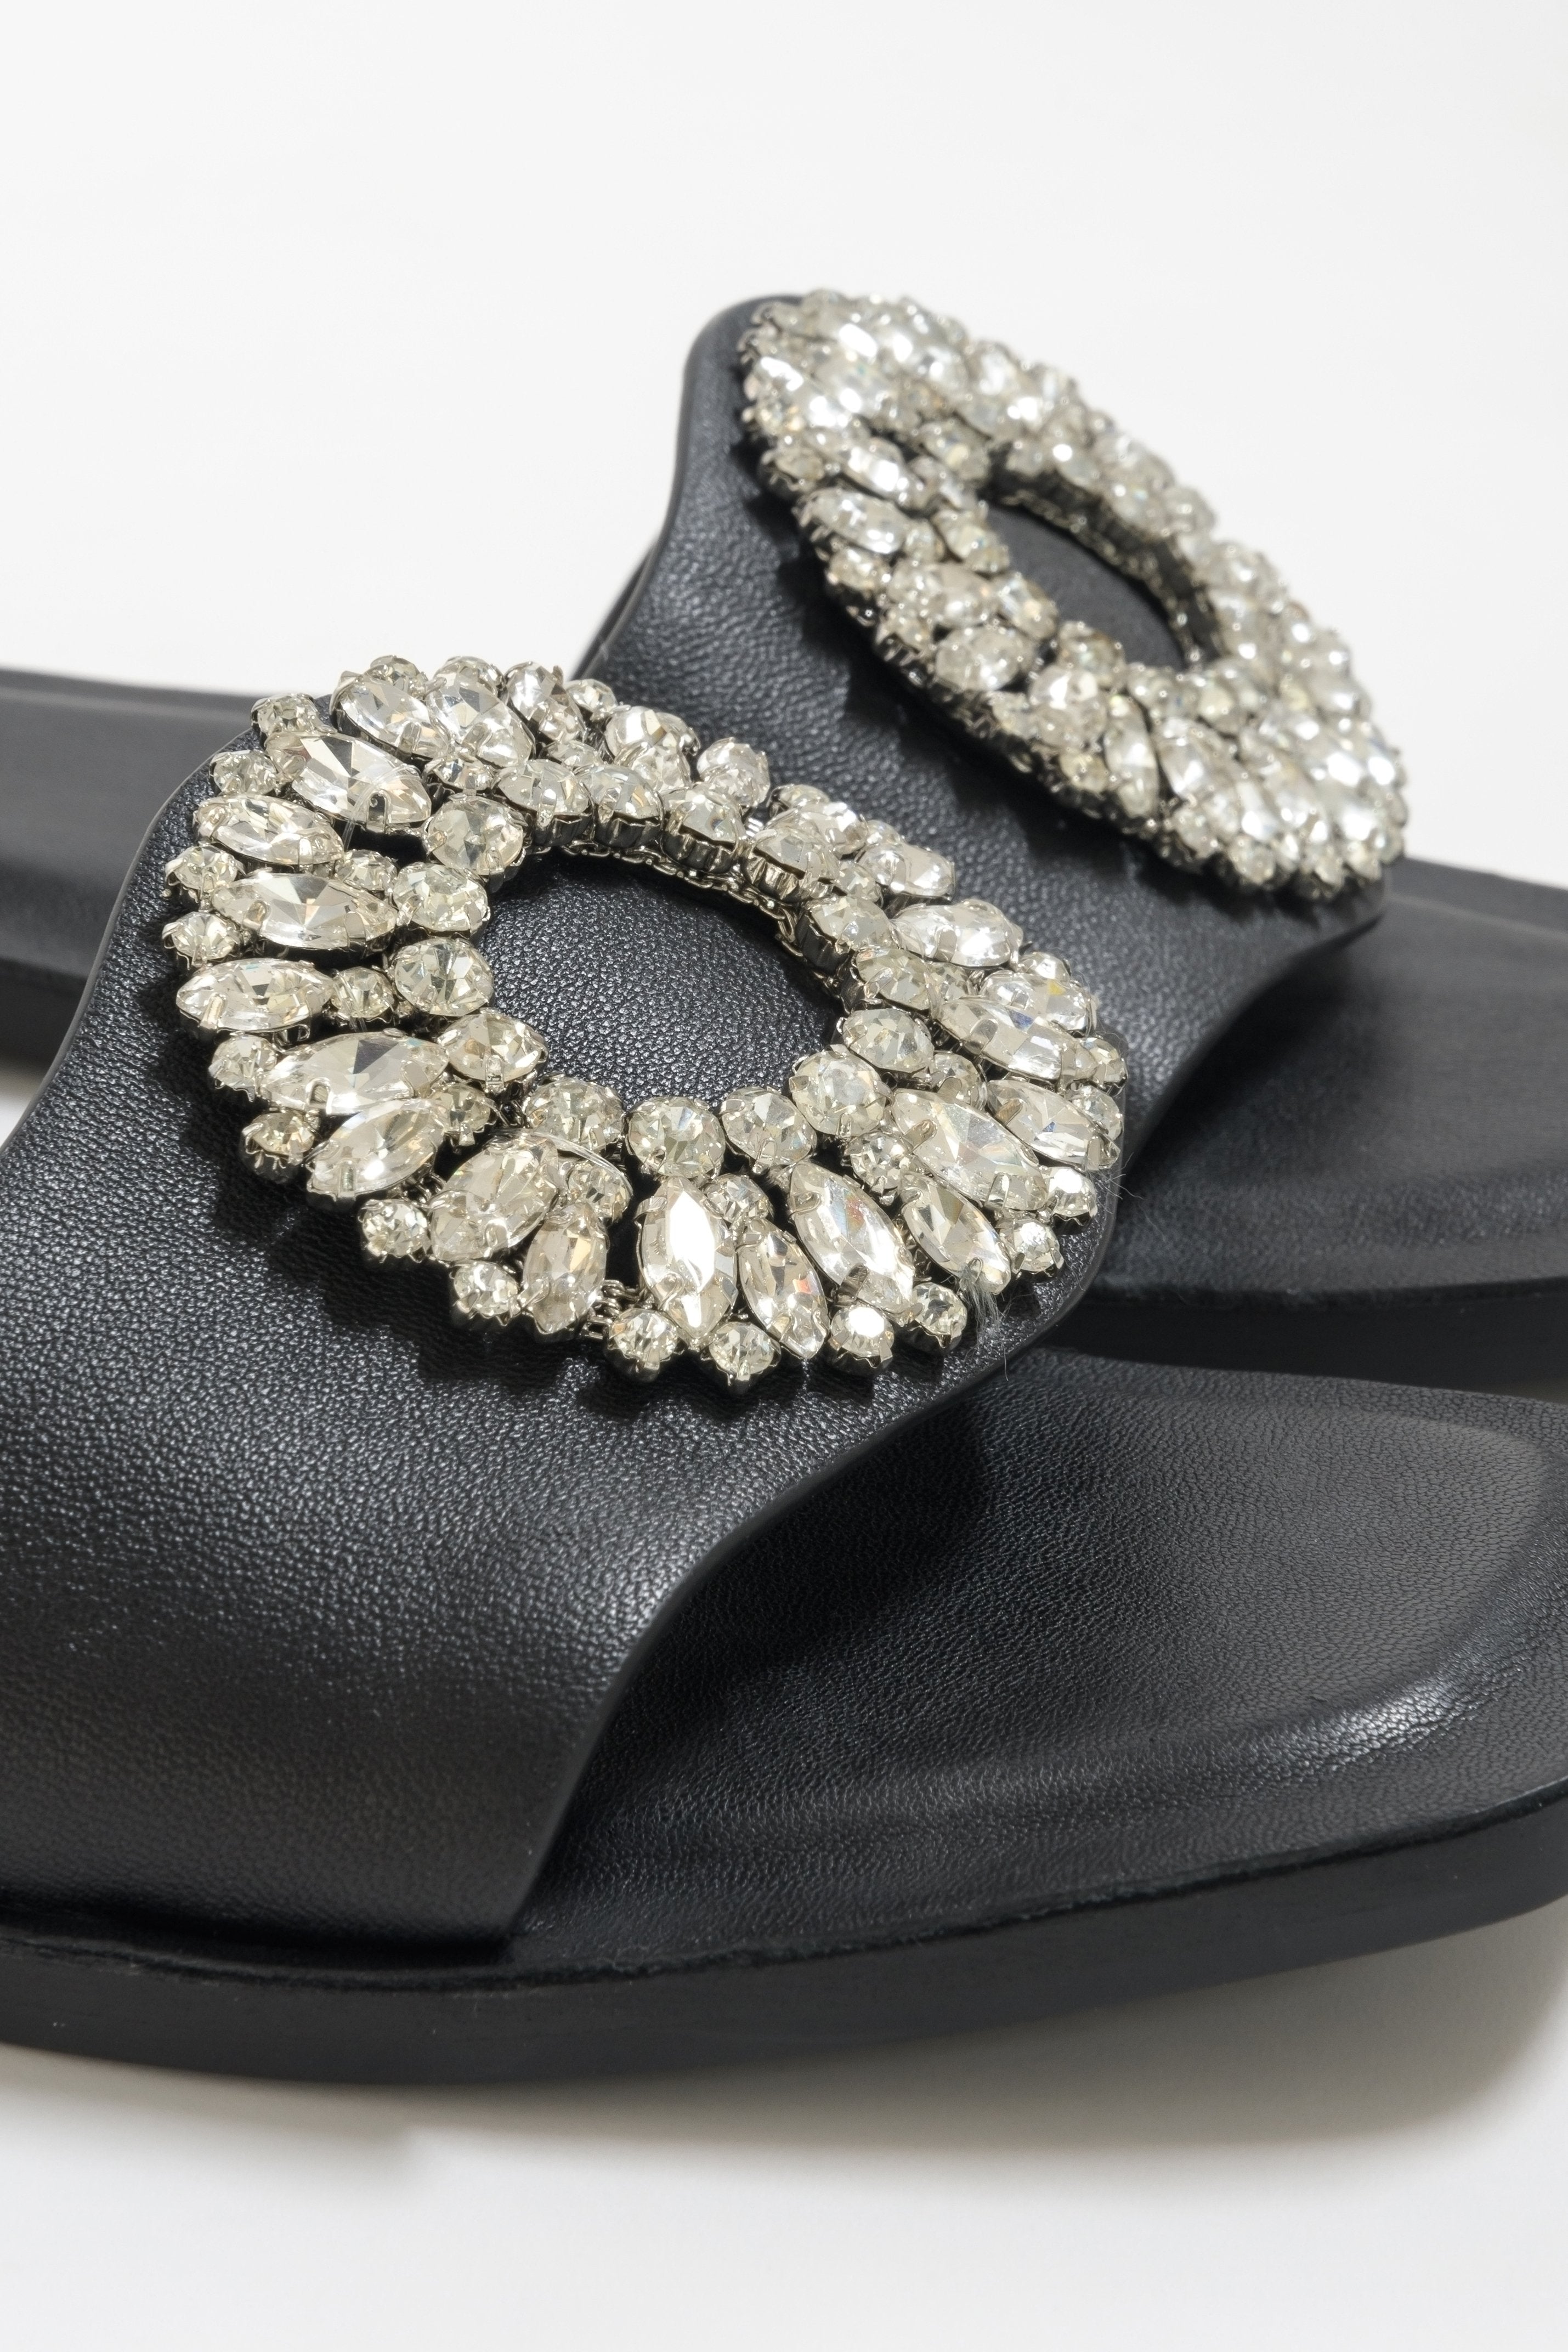 Flat slide sandals made of genuine leather in black - close-up on zirconias ornament.